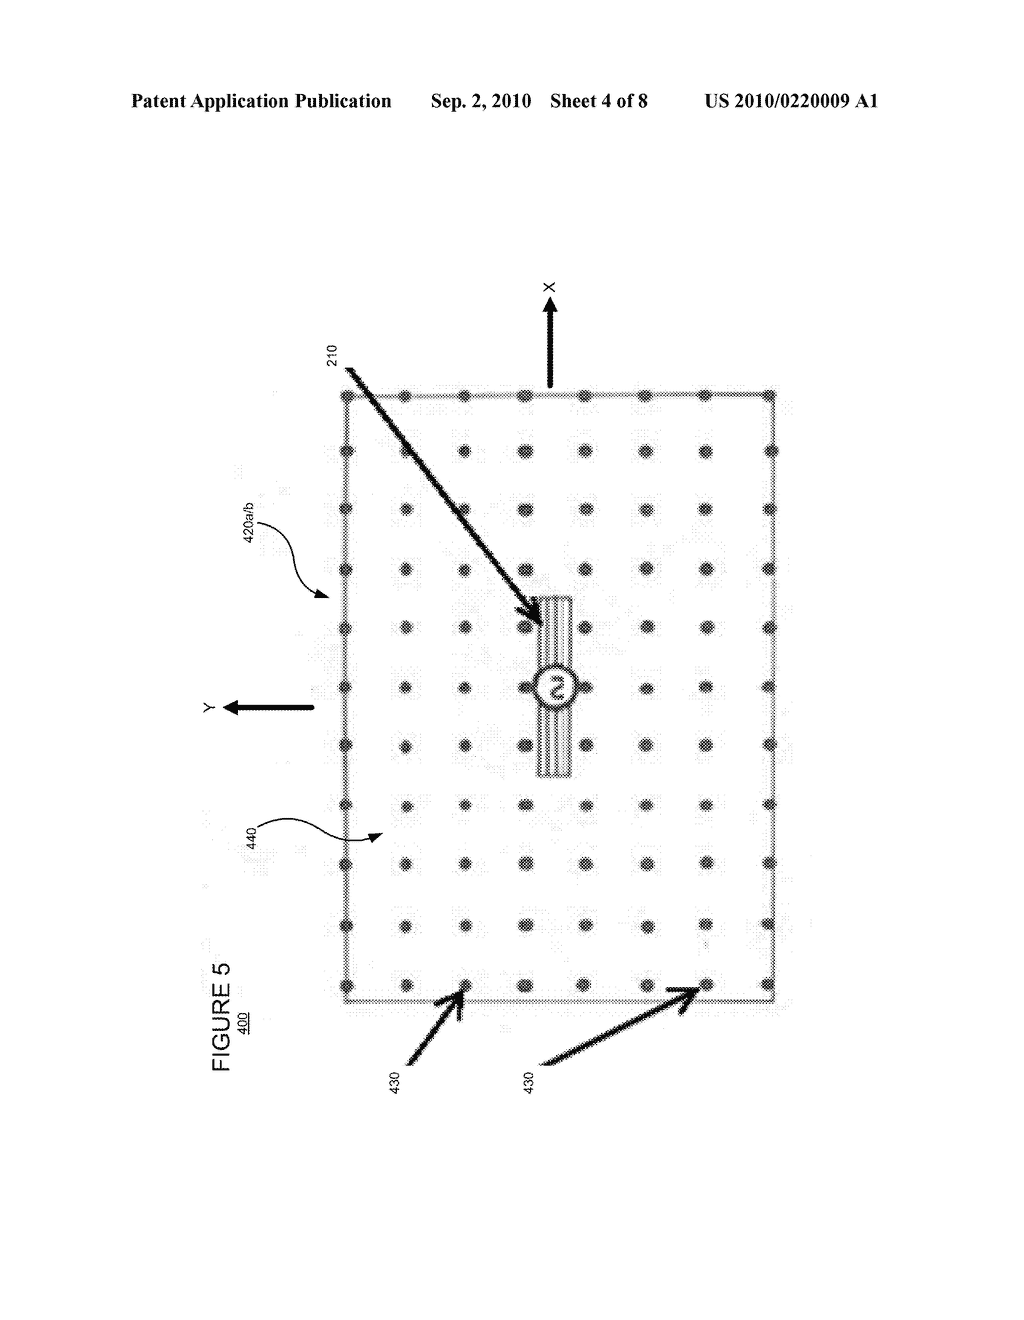 AZIMUTH-INDEPENDENT IMPEDANCE-MATCHED ELECTRONIC BEAM SCANNING FROM A LARGE ANTENNA ARRAY INCLUDING ISOTROPIC ANTENNA ELEMENTS - diagram, schematic, and image 05